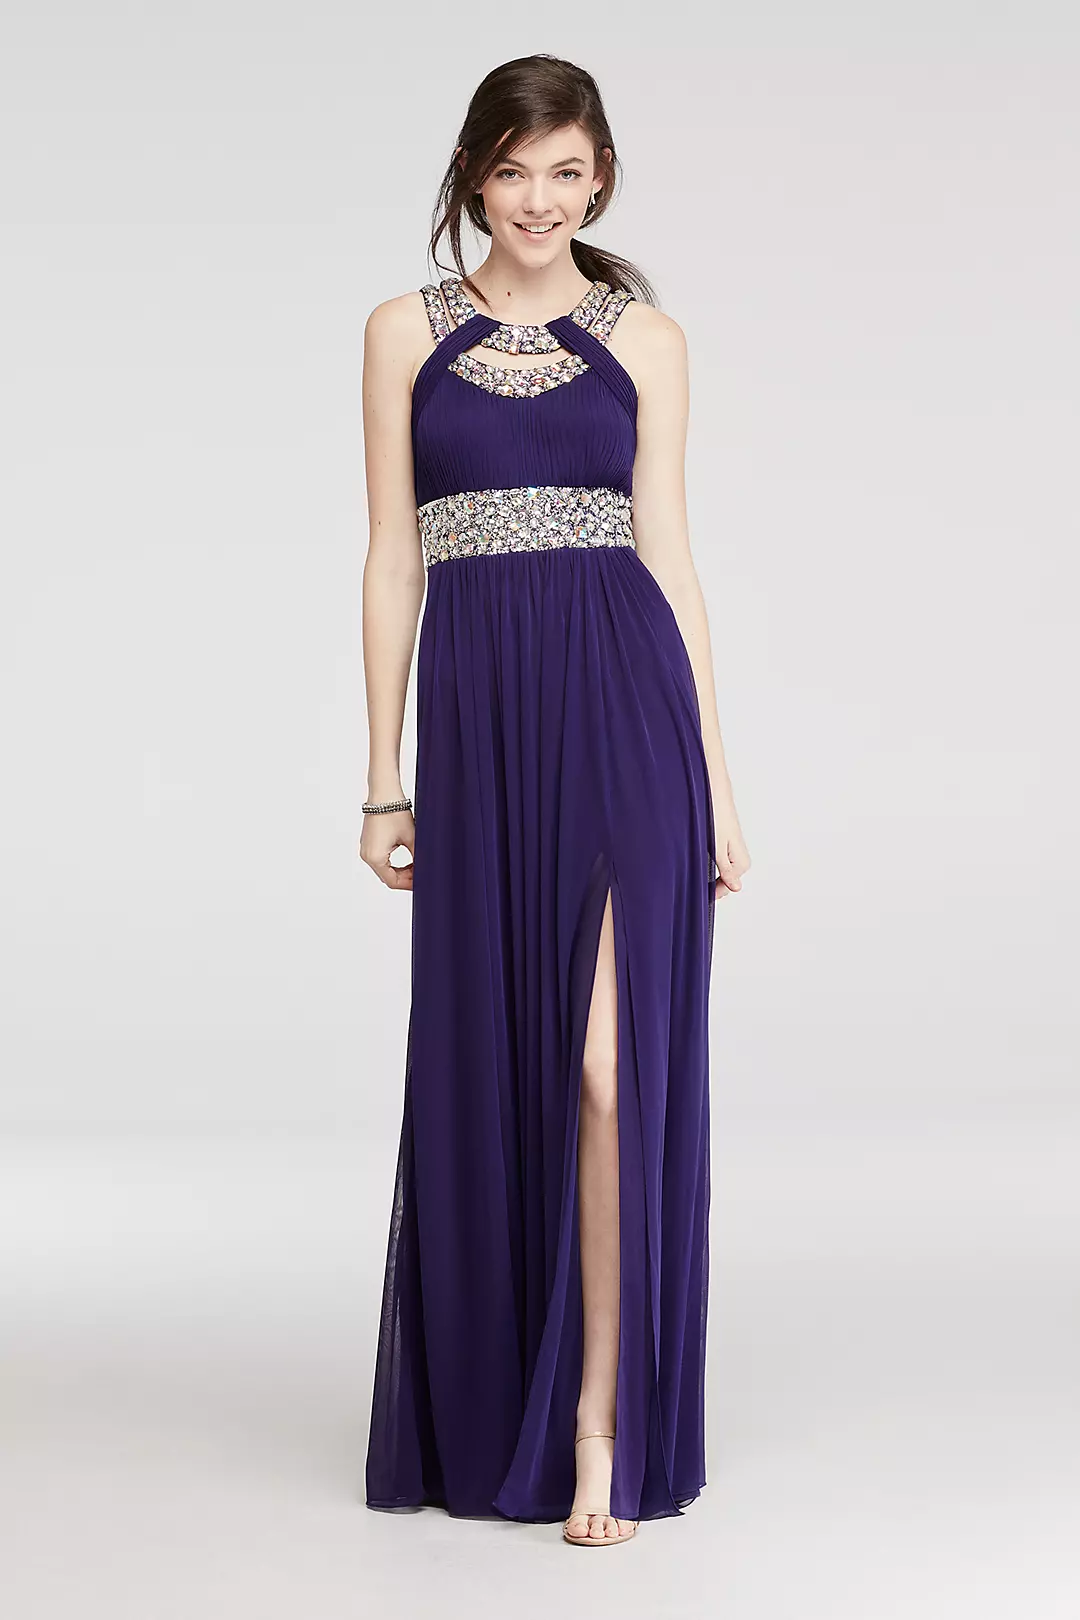 Crystal Beaded Cut Out Halter Prom Dress Image